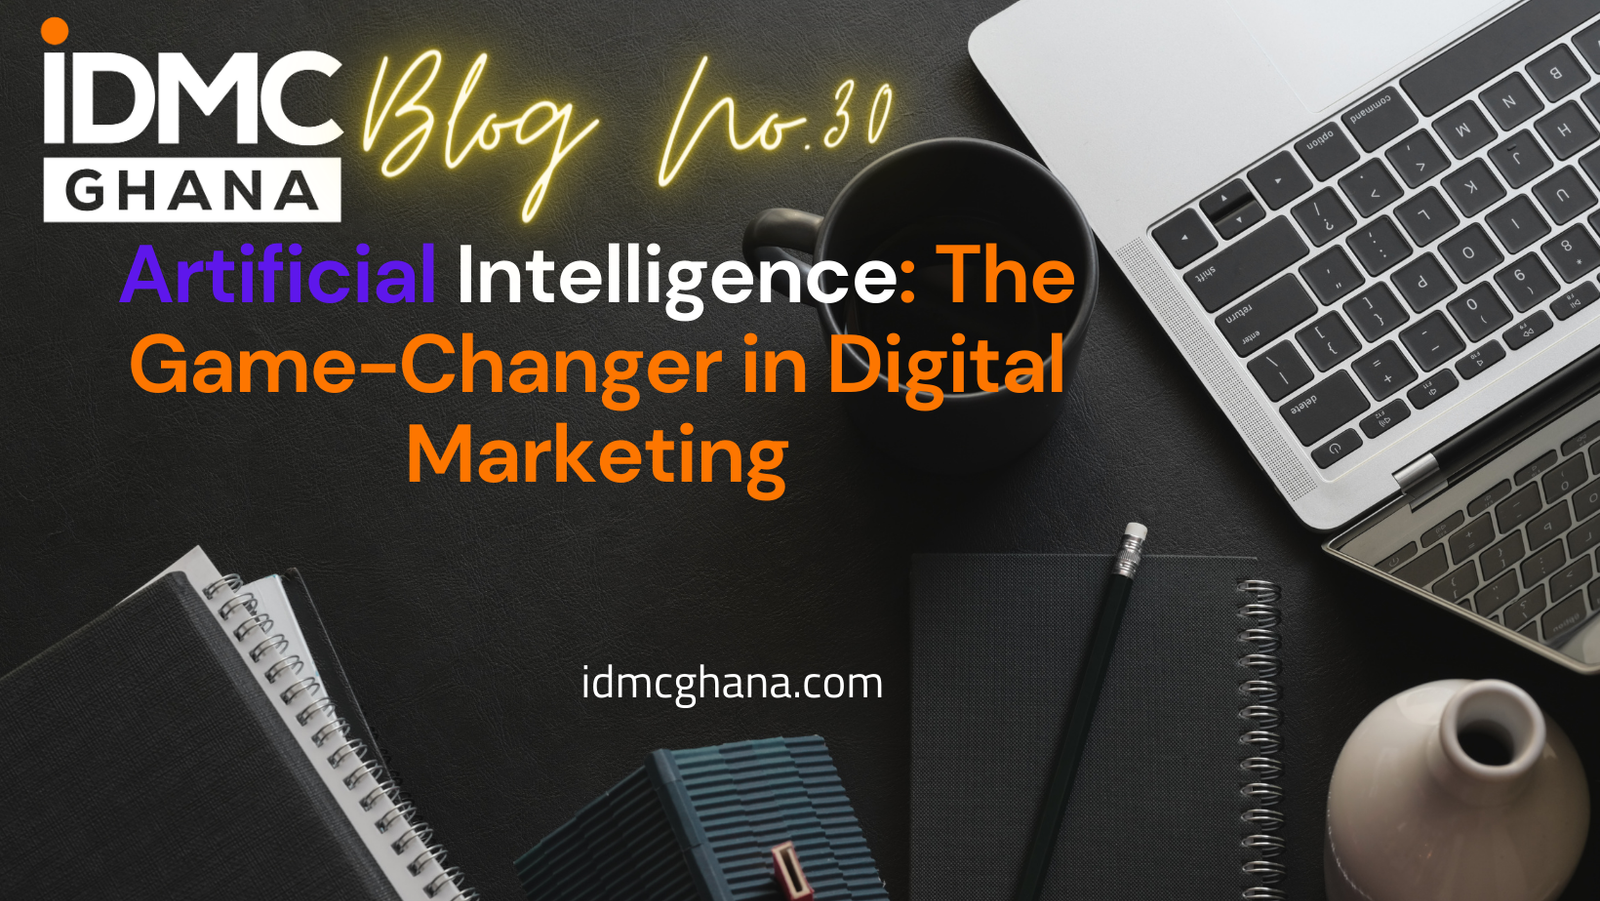 Artificial Intelligence: The Game-Changer in Digital Marketing